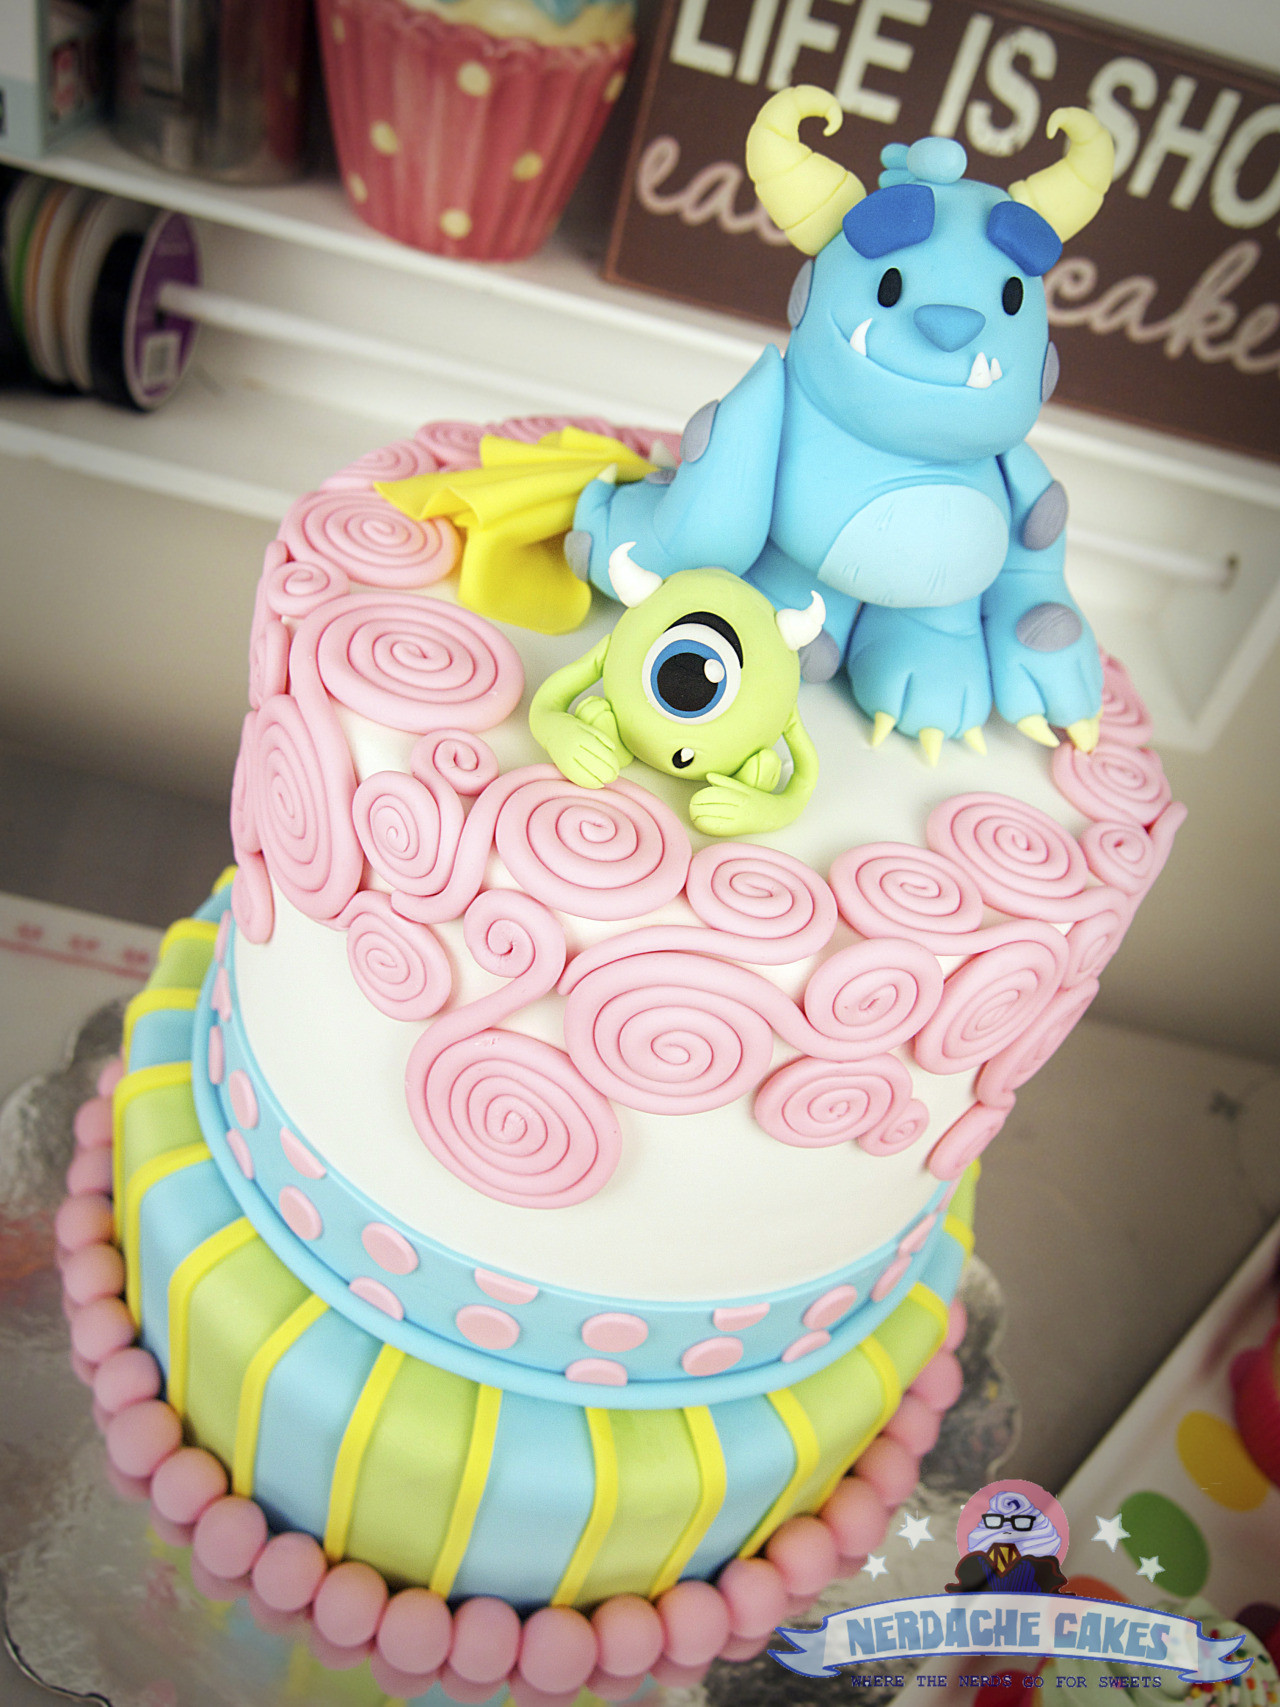 Monsters Inc Birthday Cake
 Monsters Inc 1st Birthday Cake A super cute Geeky